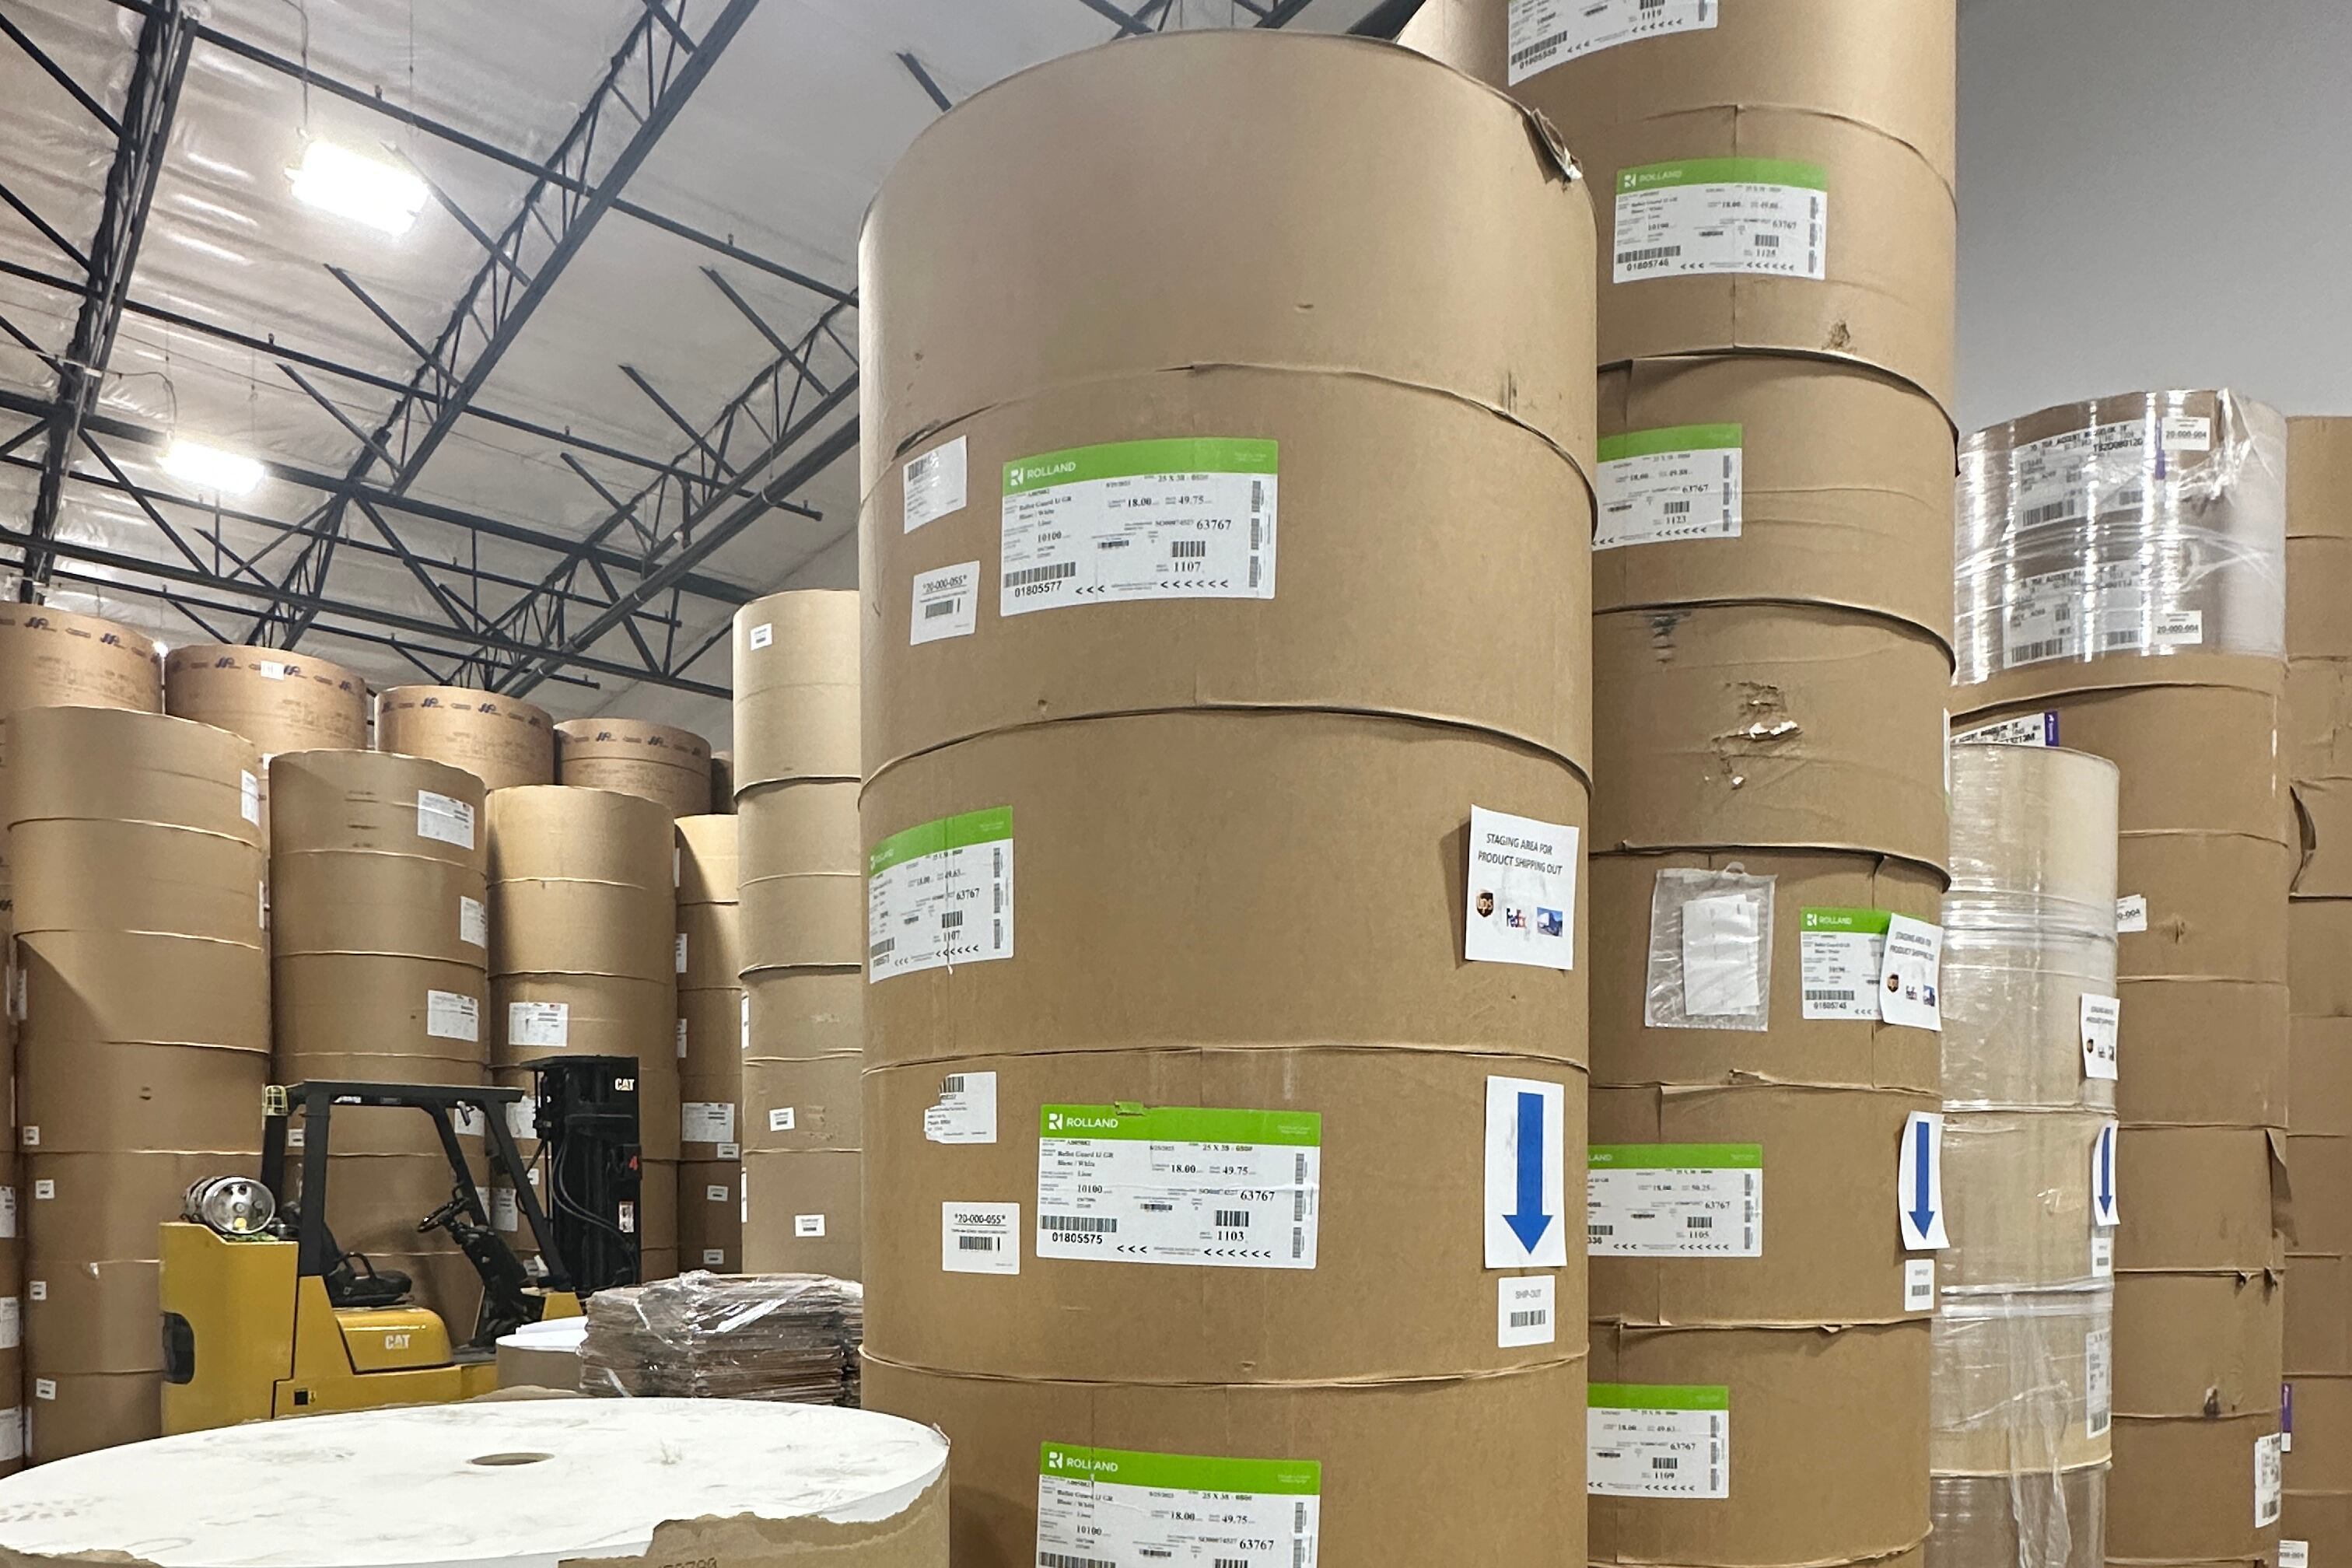 Stacks of giant brown rolls of paper in a warehouse.